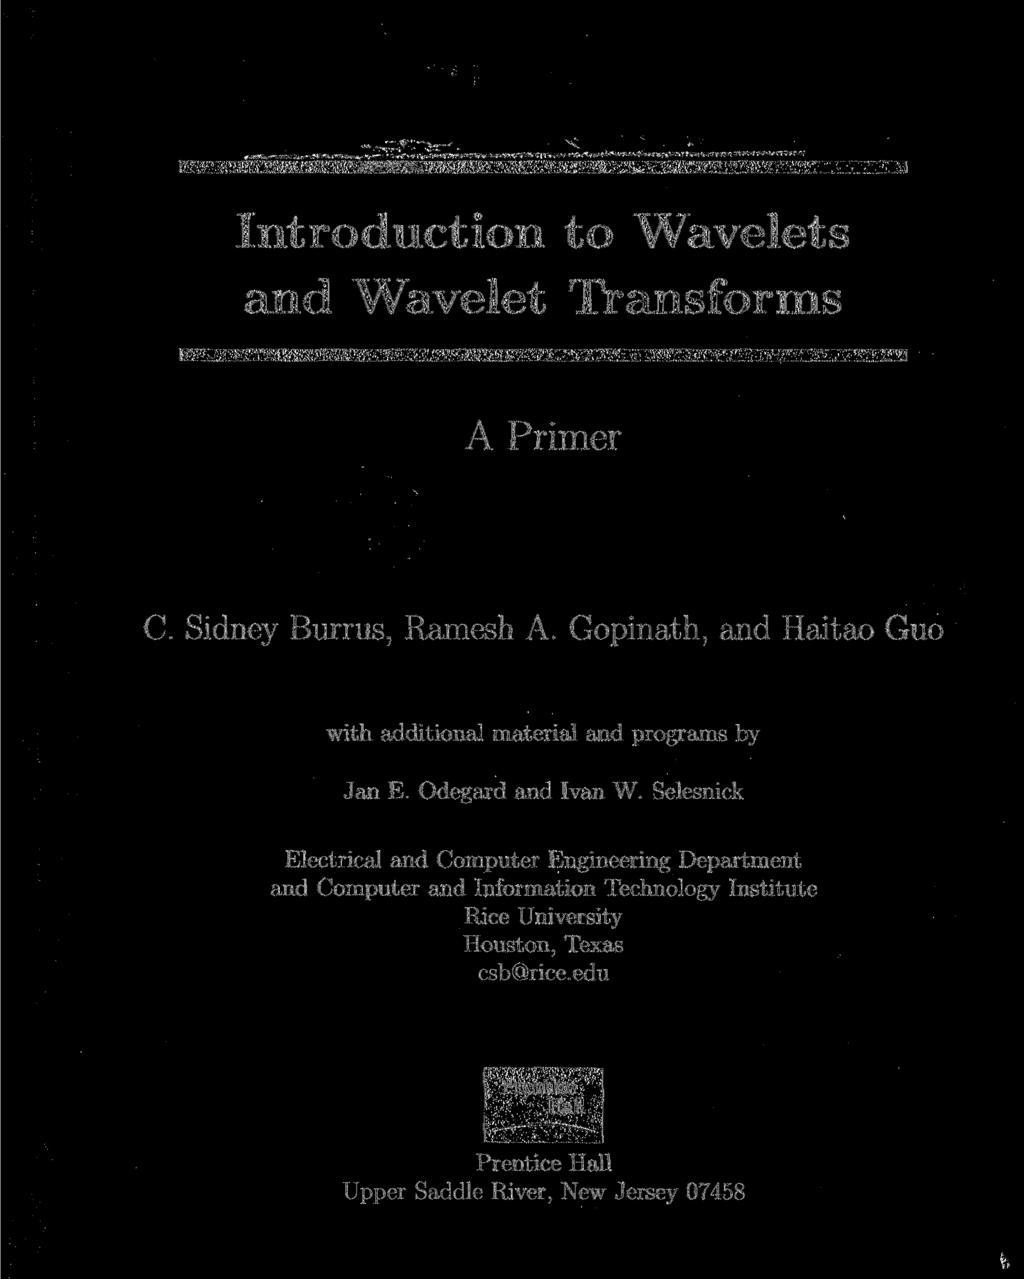 Introduction to Wavelets and Wavelet Transforms A Primer C. Sidney Burrus, Ramesh A. Gopinath, and Haitao Guo with additional material and programs by Jan E. Odegard and Ivan W.